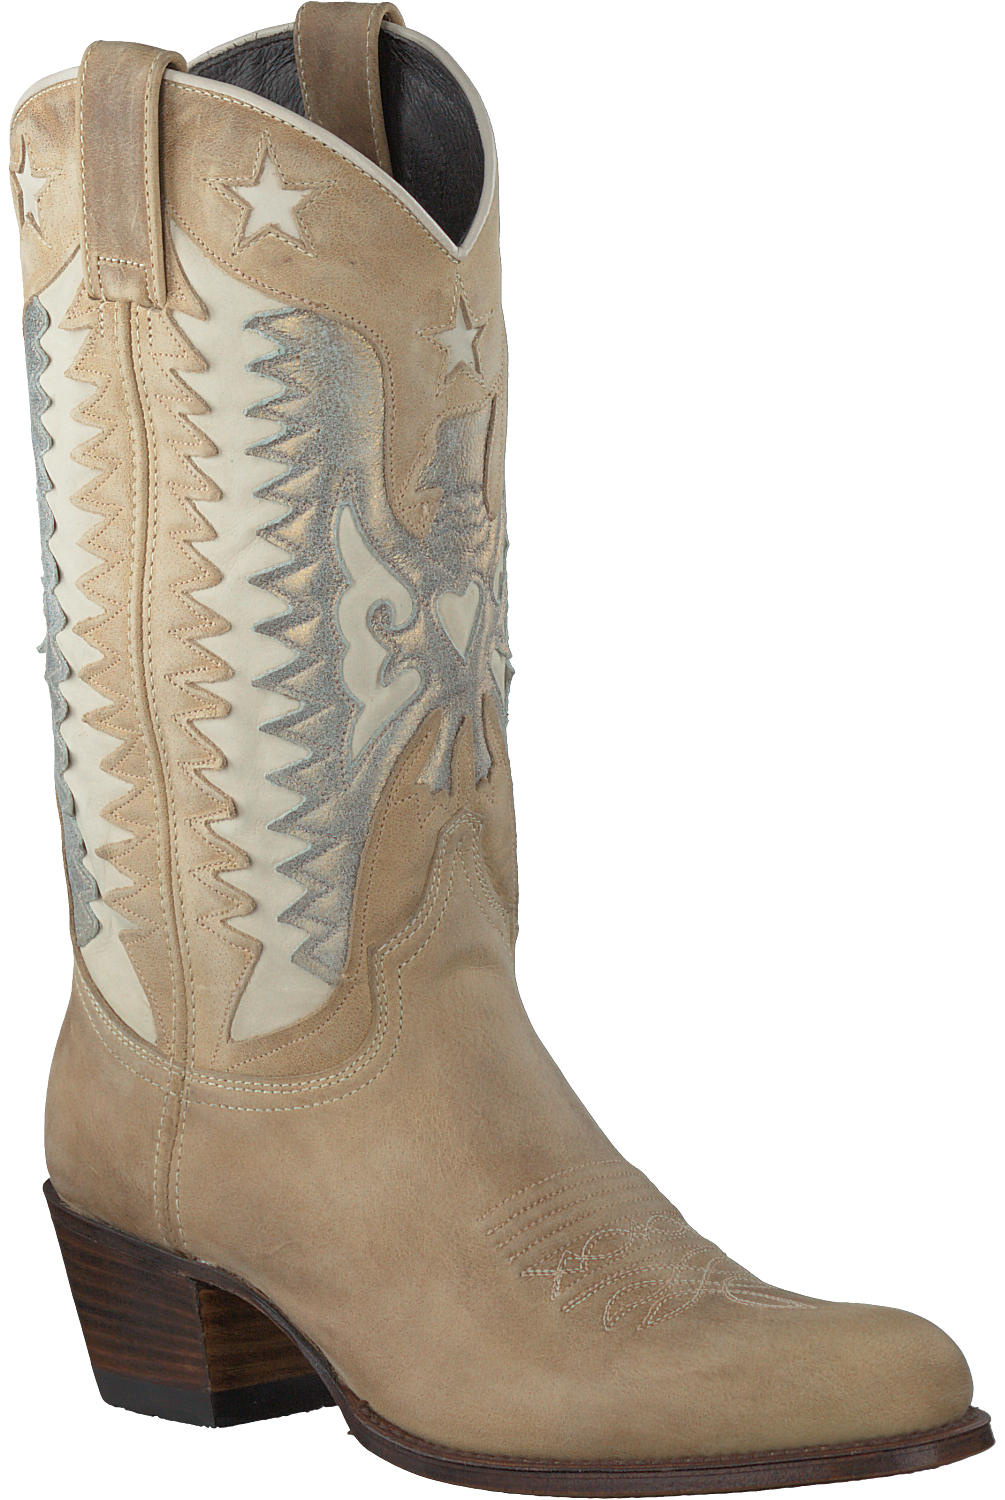 Pair Of Cowboy Boots Background PNG Image